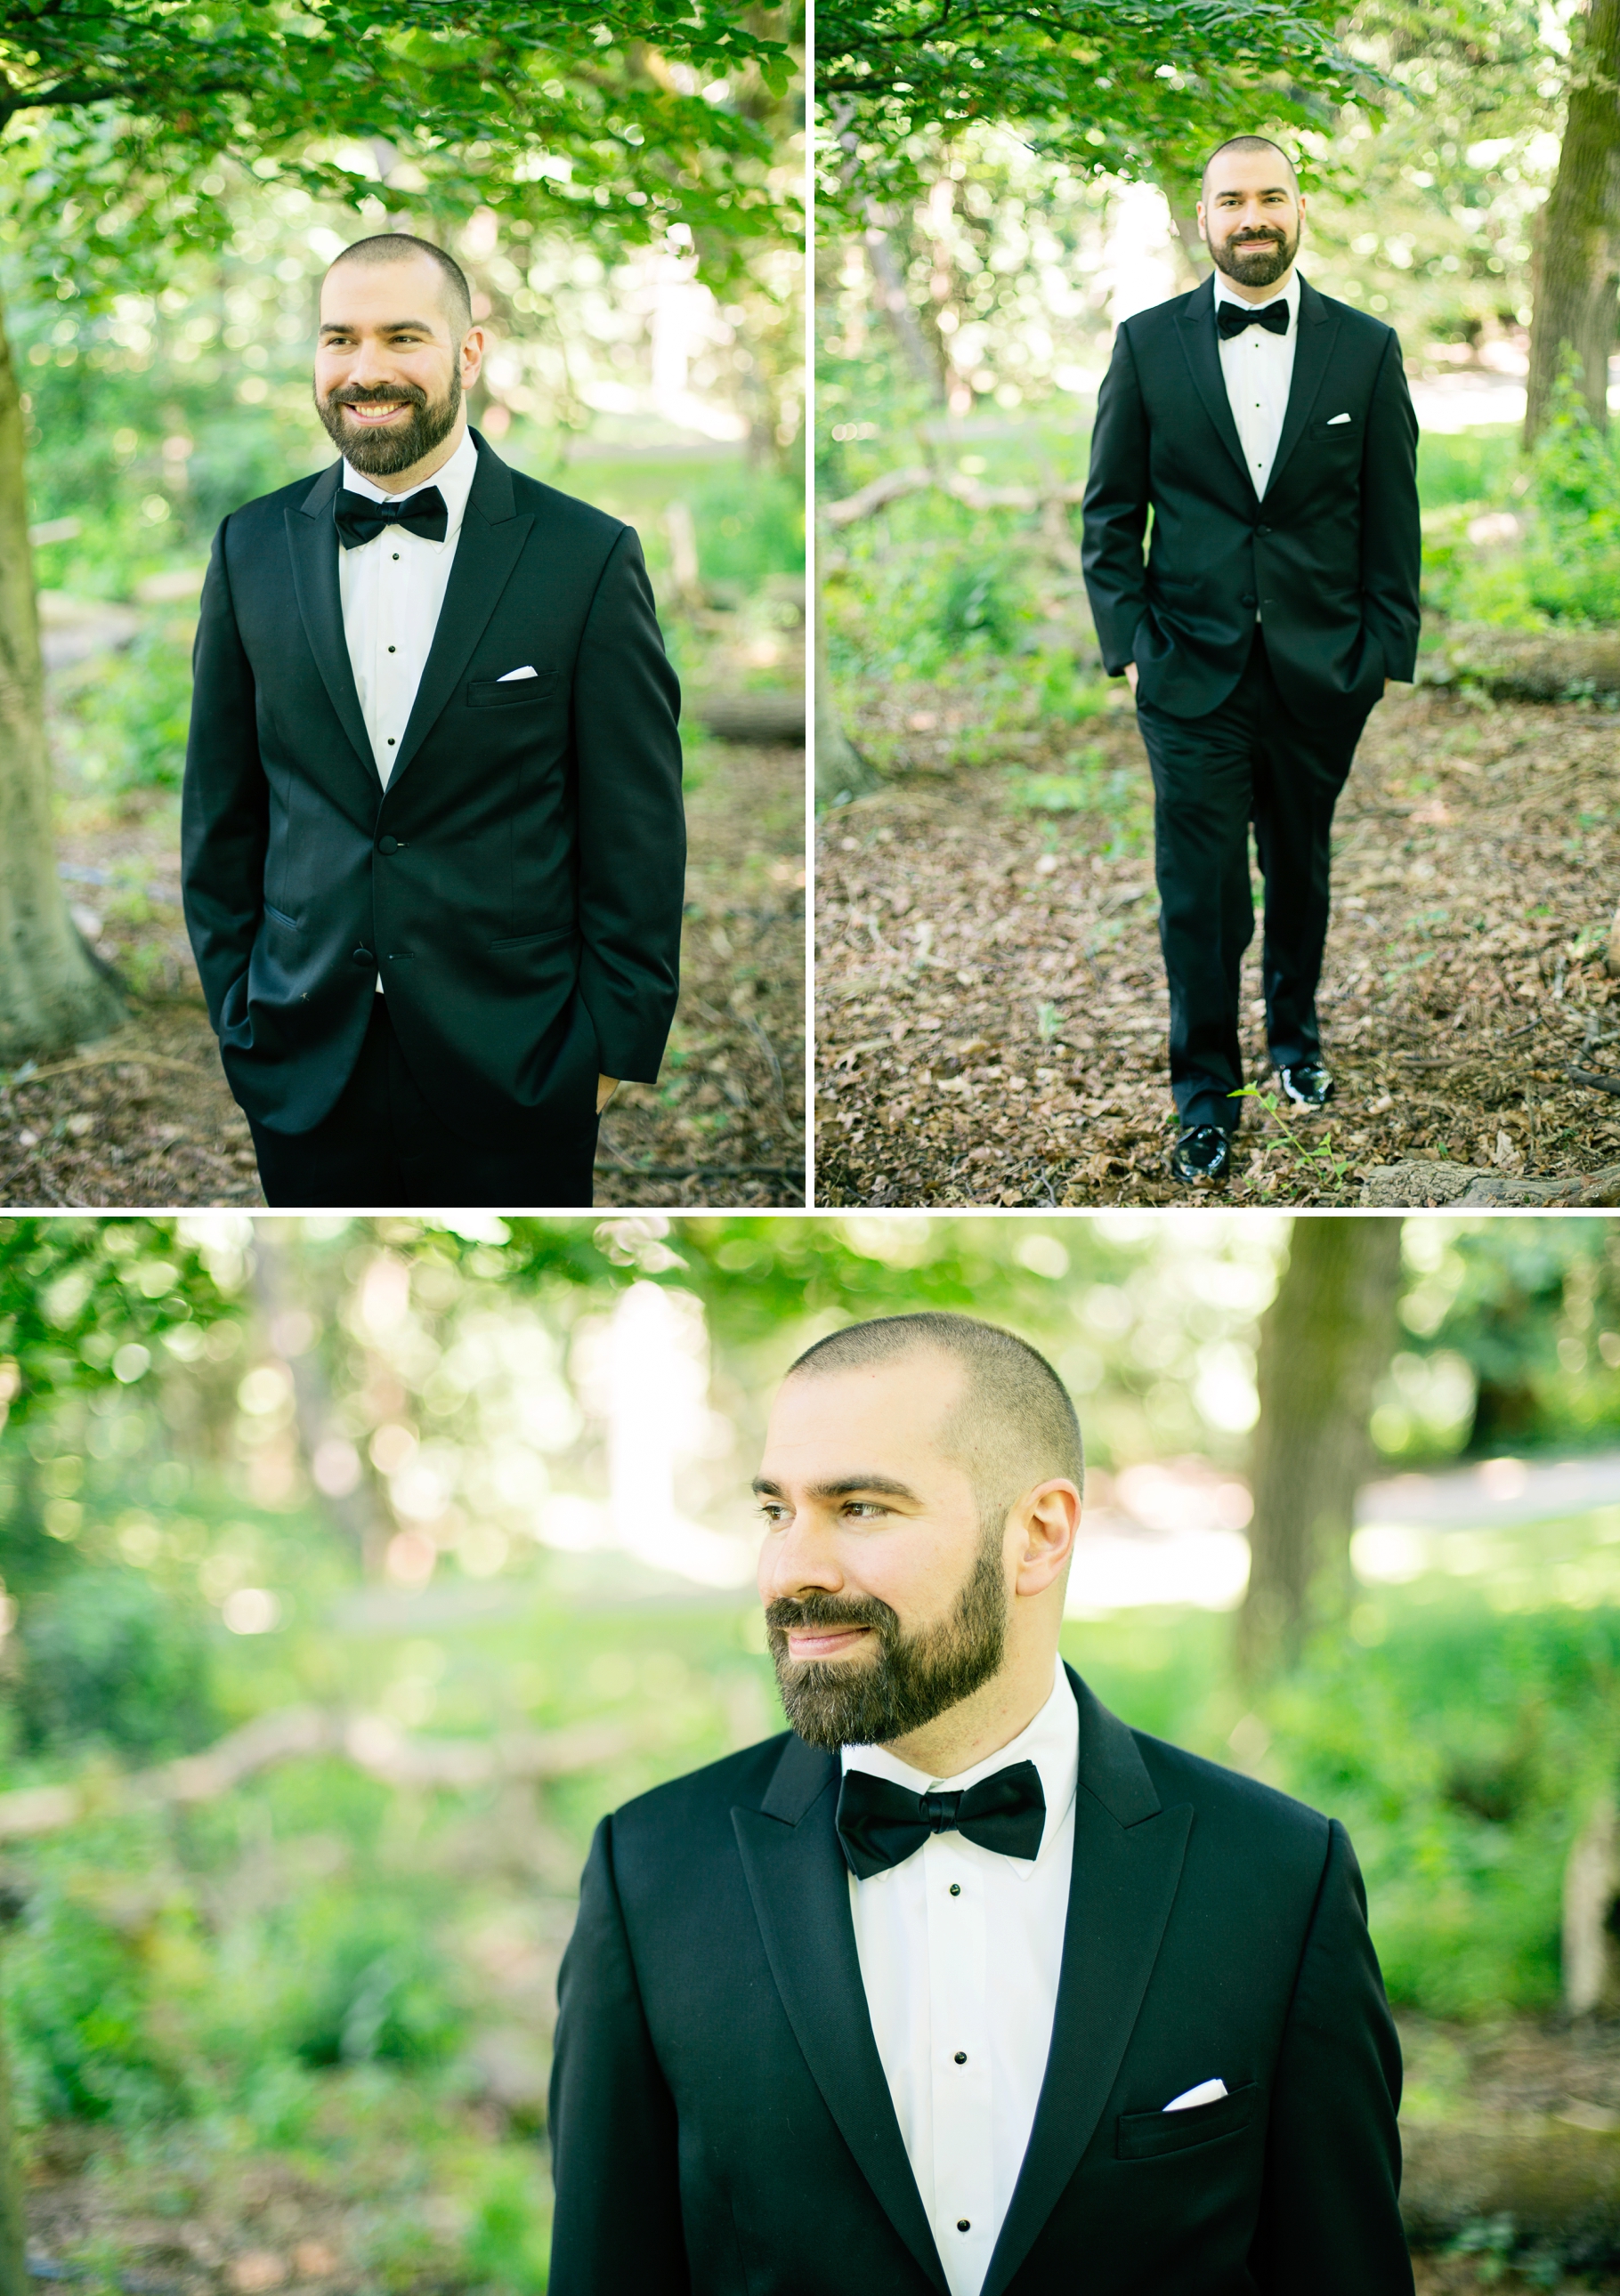 20-Groom-Portraits-Classic-Groom-Style-Bow-Tie-Black-Suit-Woodland-Park-Seattle-Wedding-Photographer-Photography-by-Betty-Elaine